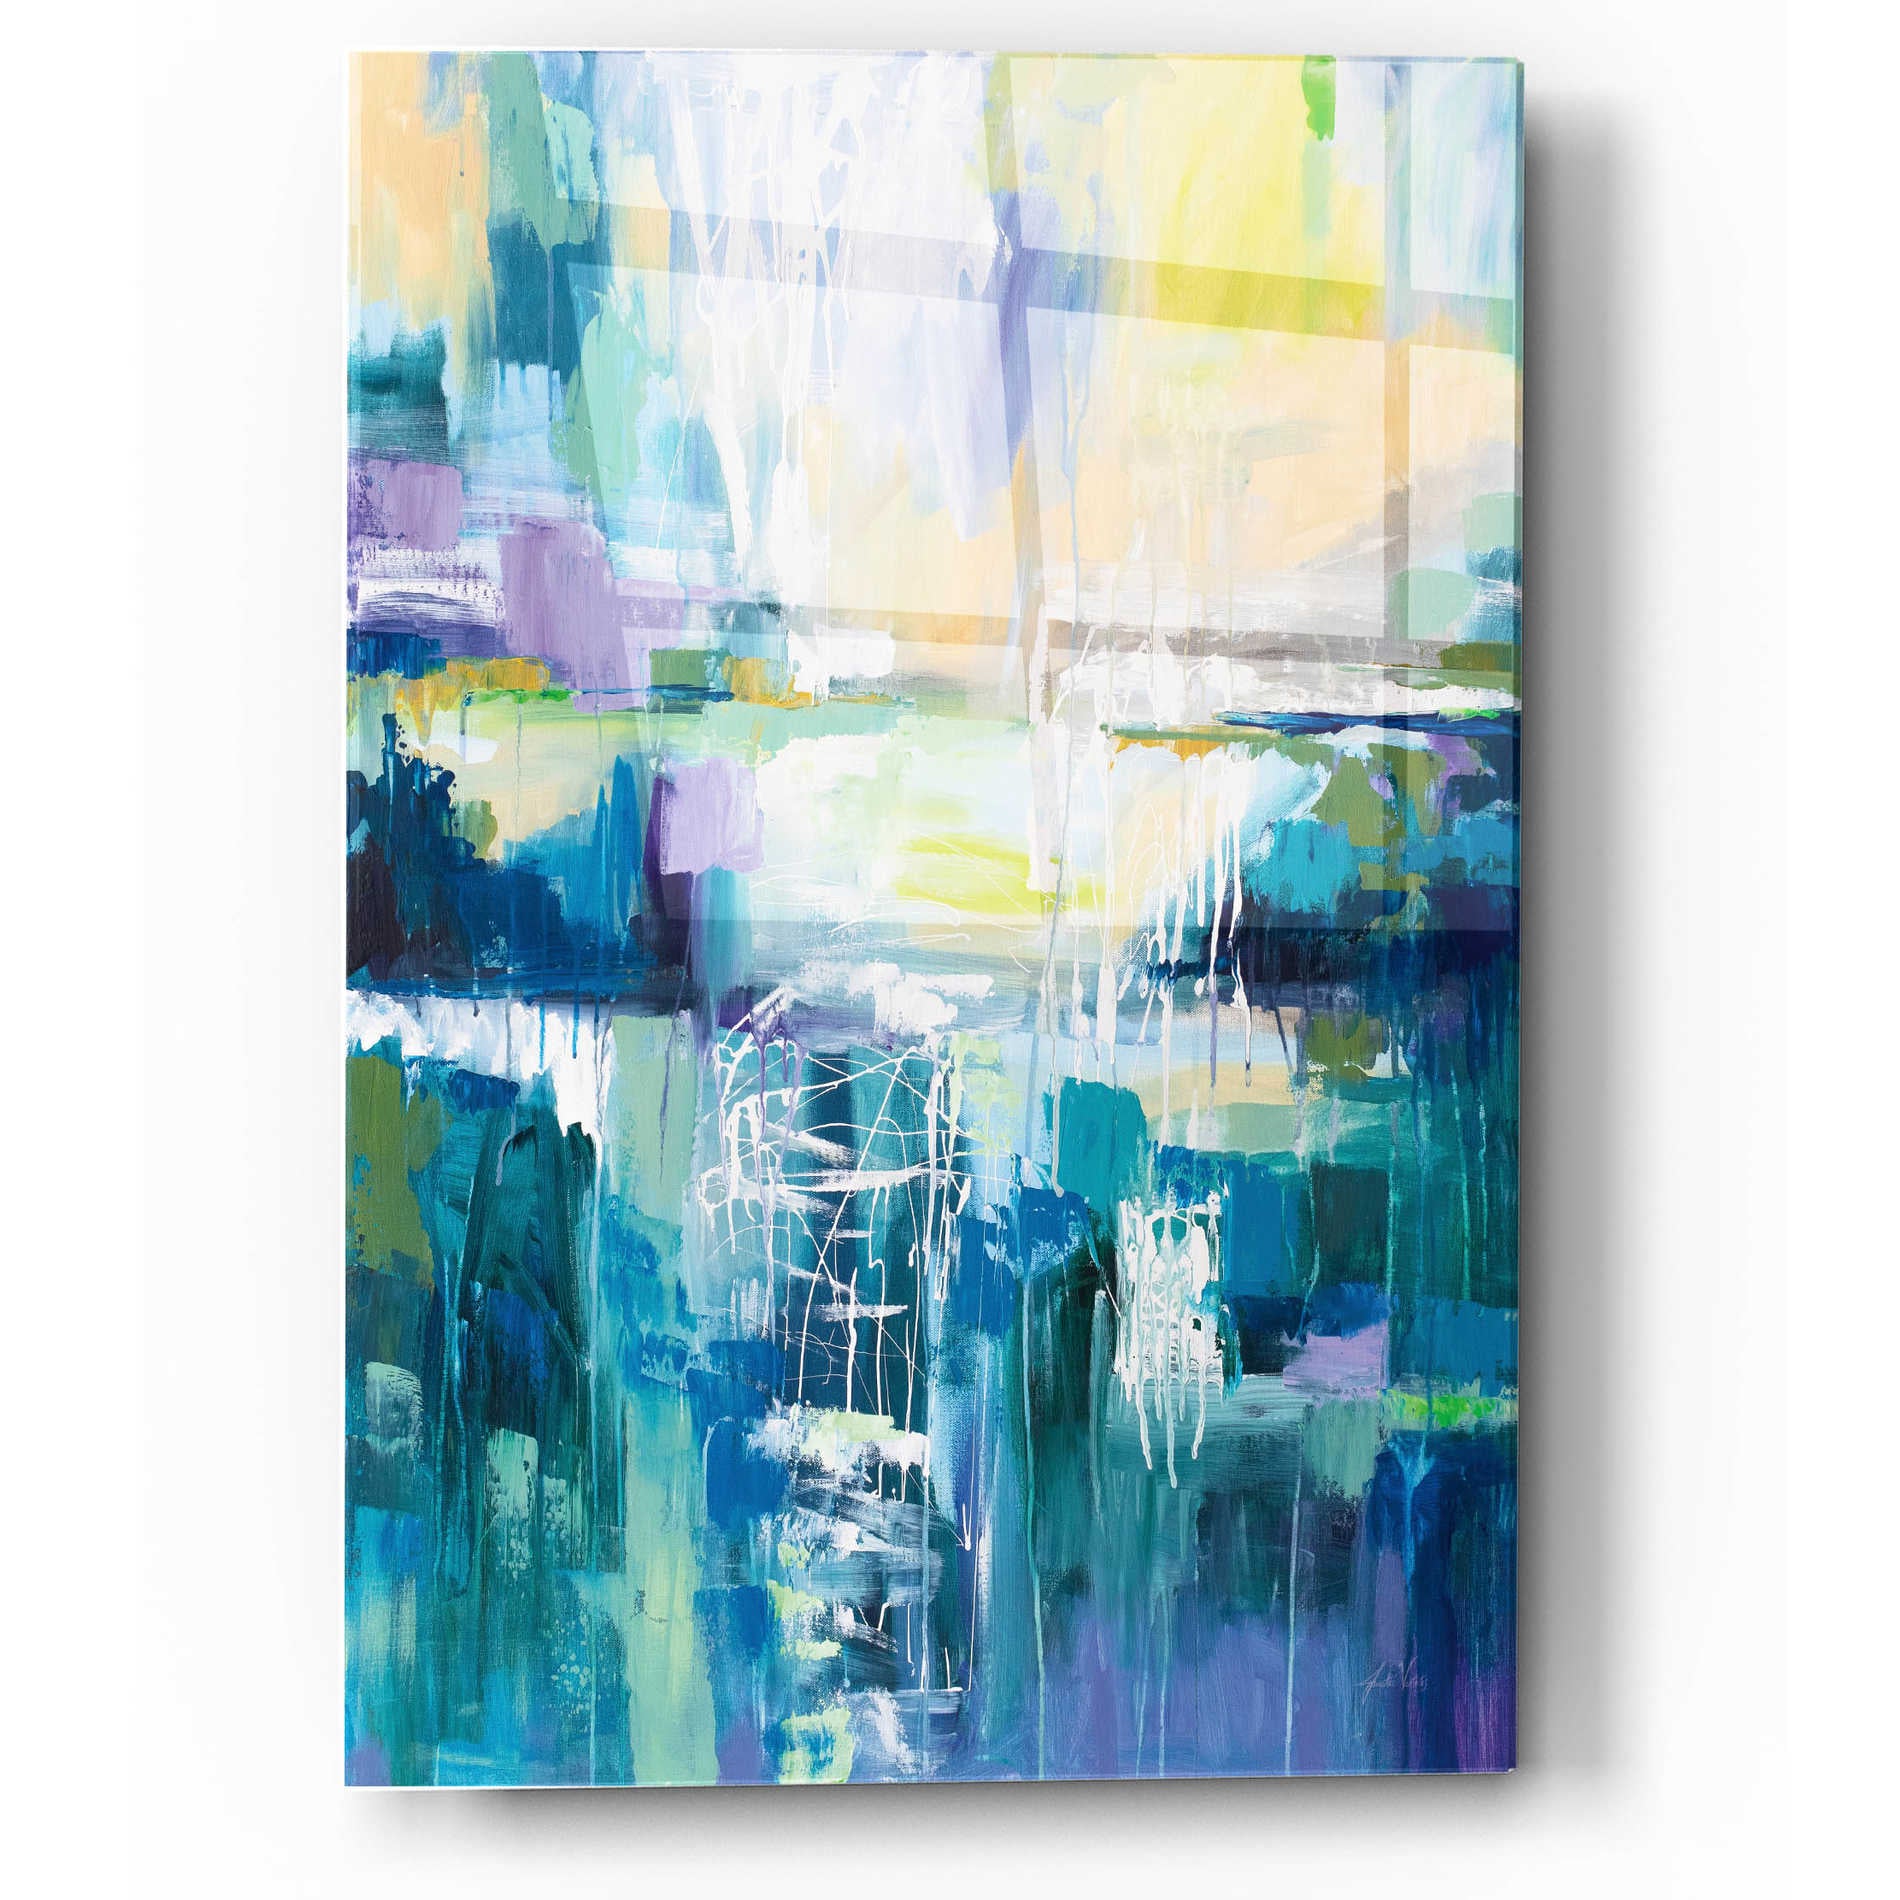 Epic Art 'Into the Water' by Jeanette Vertentes, Acrylic Glass Wall Art,12x16